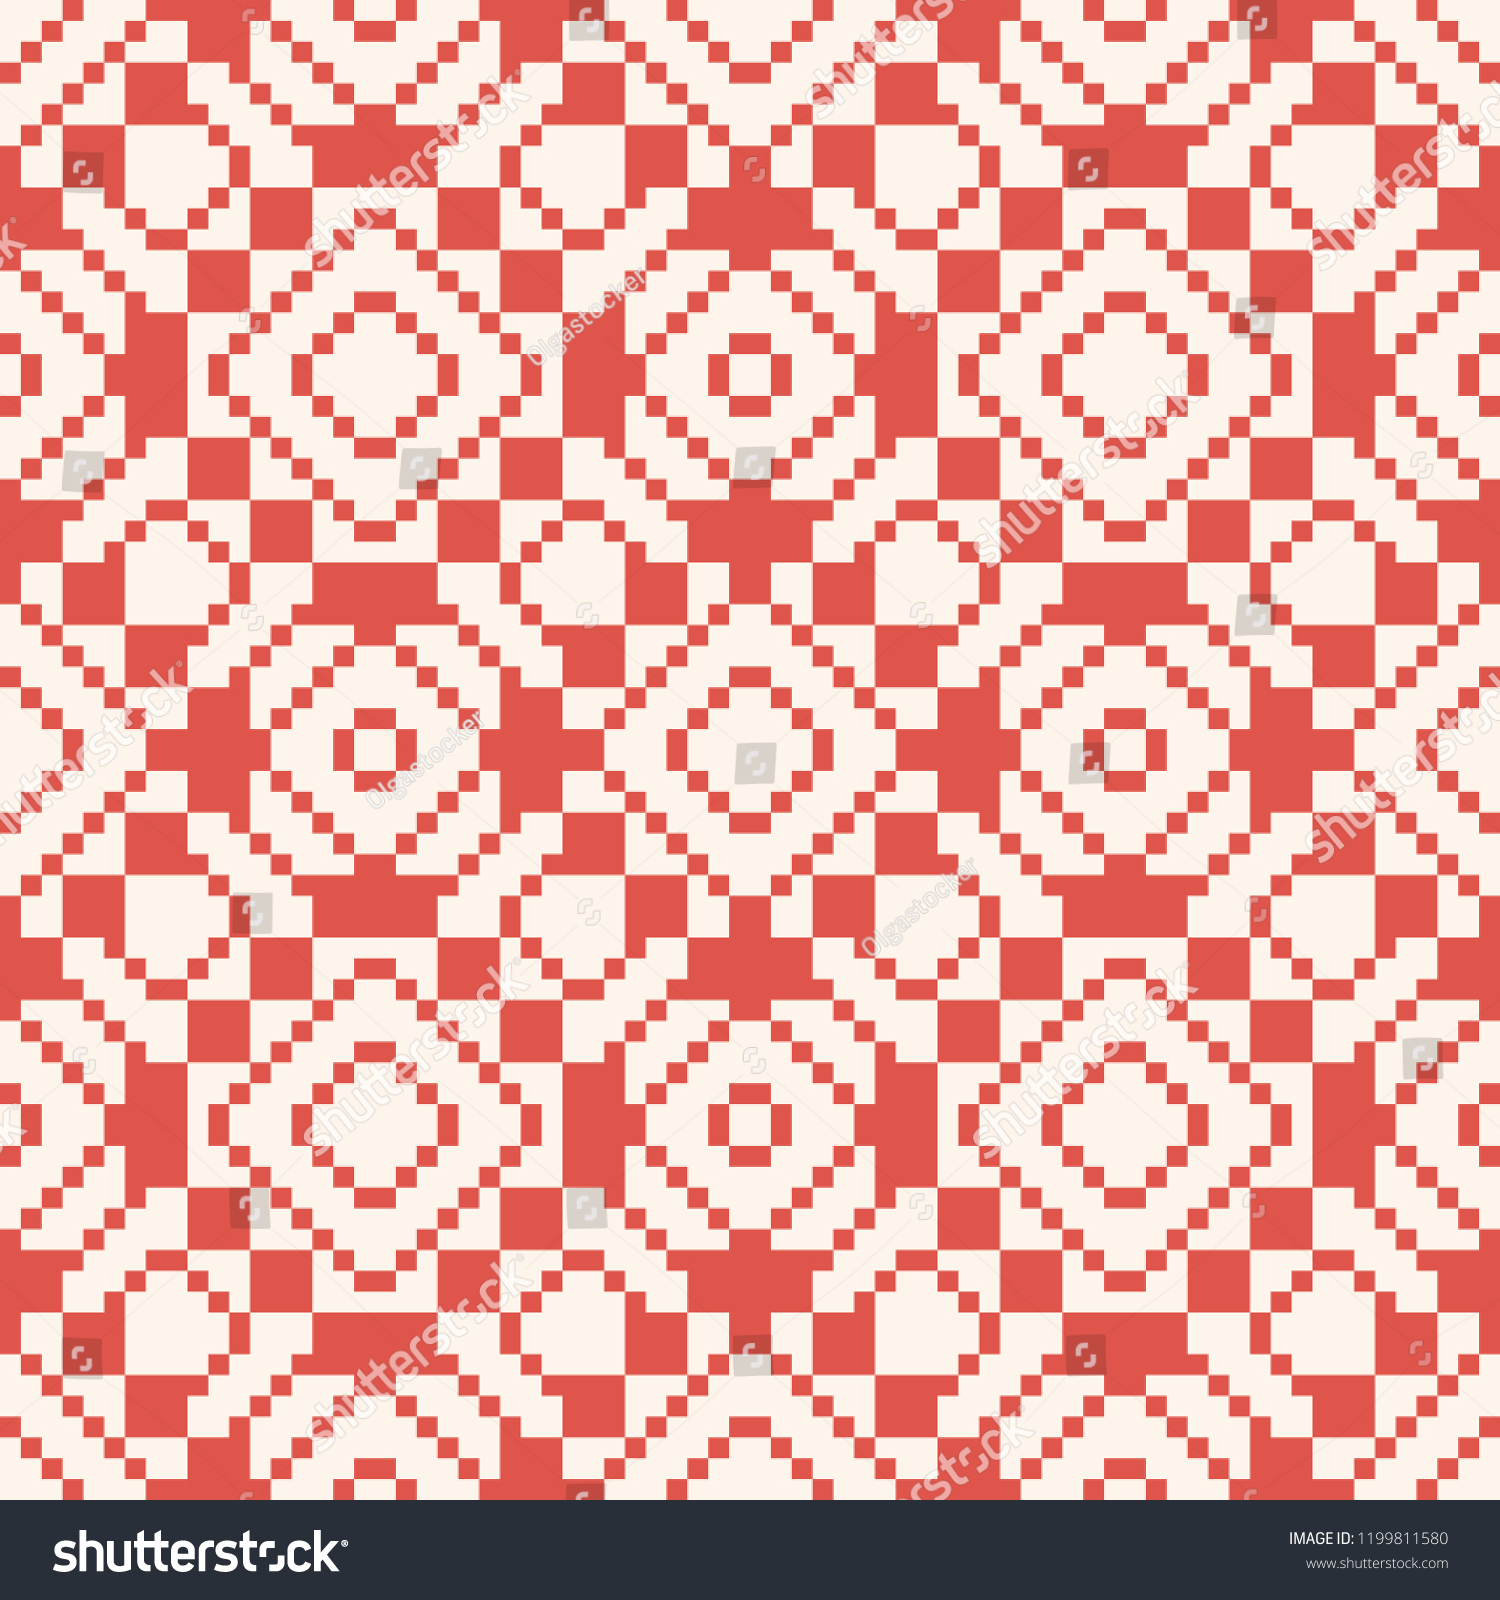 SVG of Vector geometric traditional folk ornament. Ethnic tribal seamless pattern. Ornamental background with small squares, crosses, rhombuses. Repeat texture of embroidery, knitting. Red and white colors svg